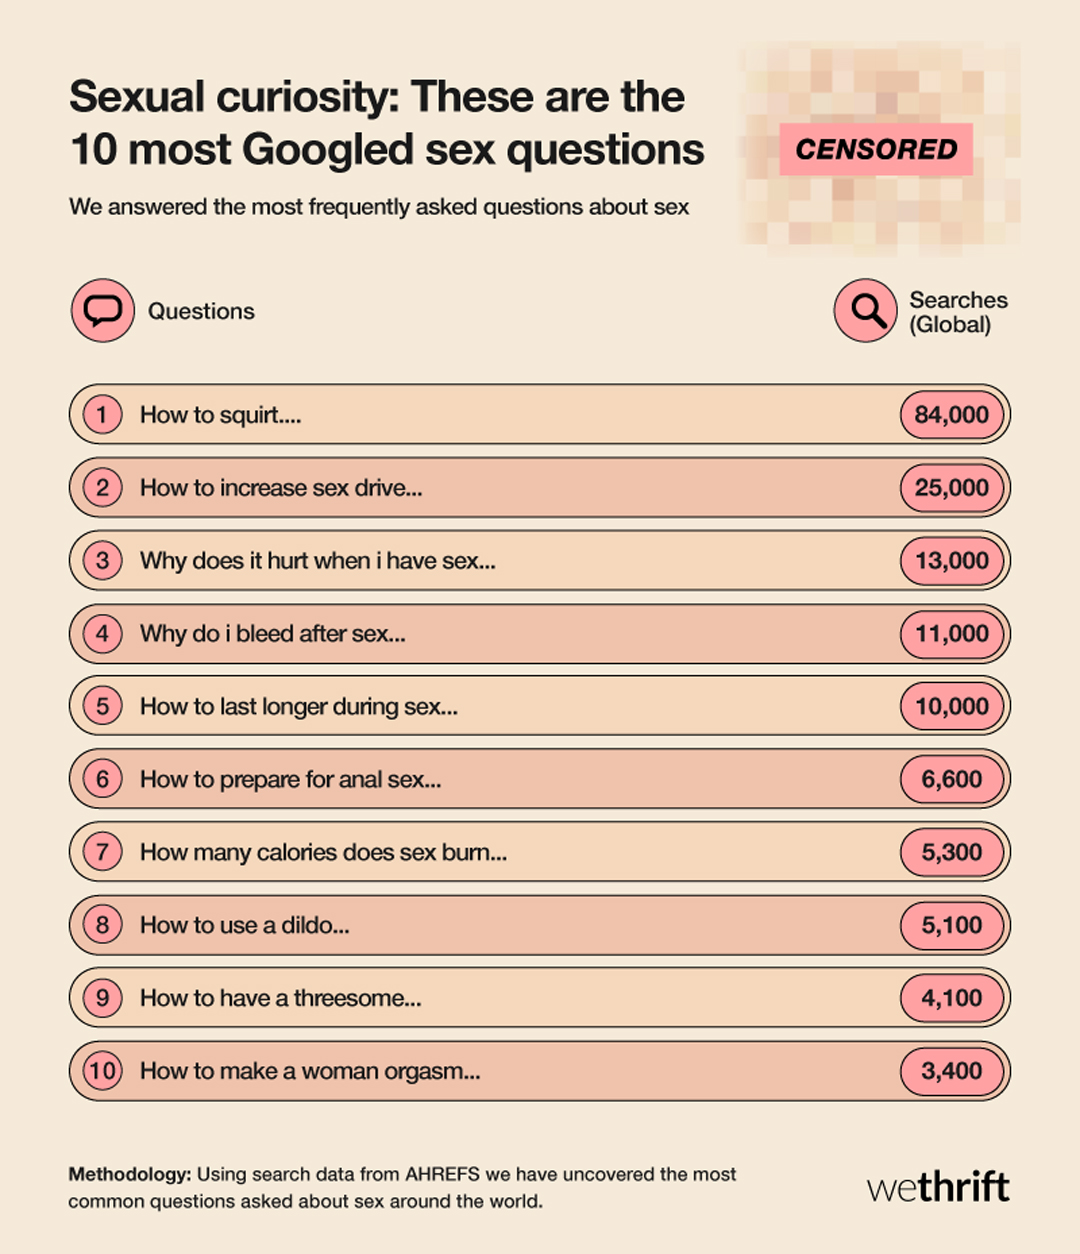 Top 10 most Googled questions about